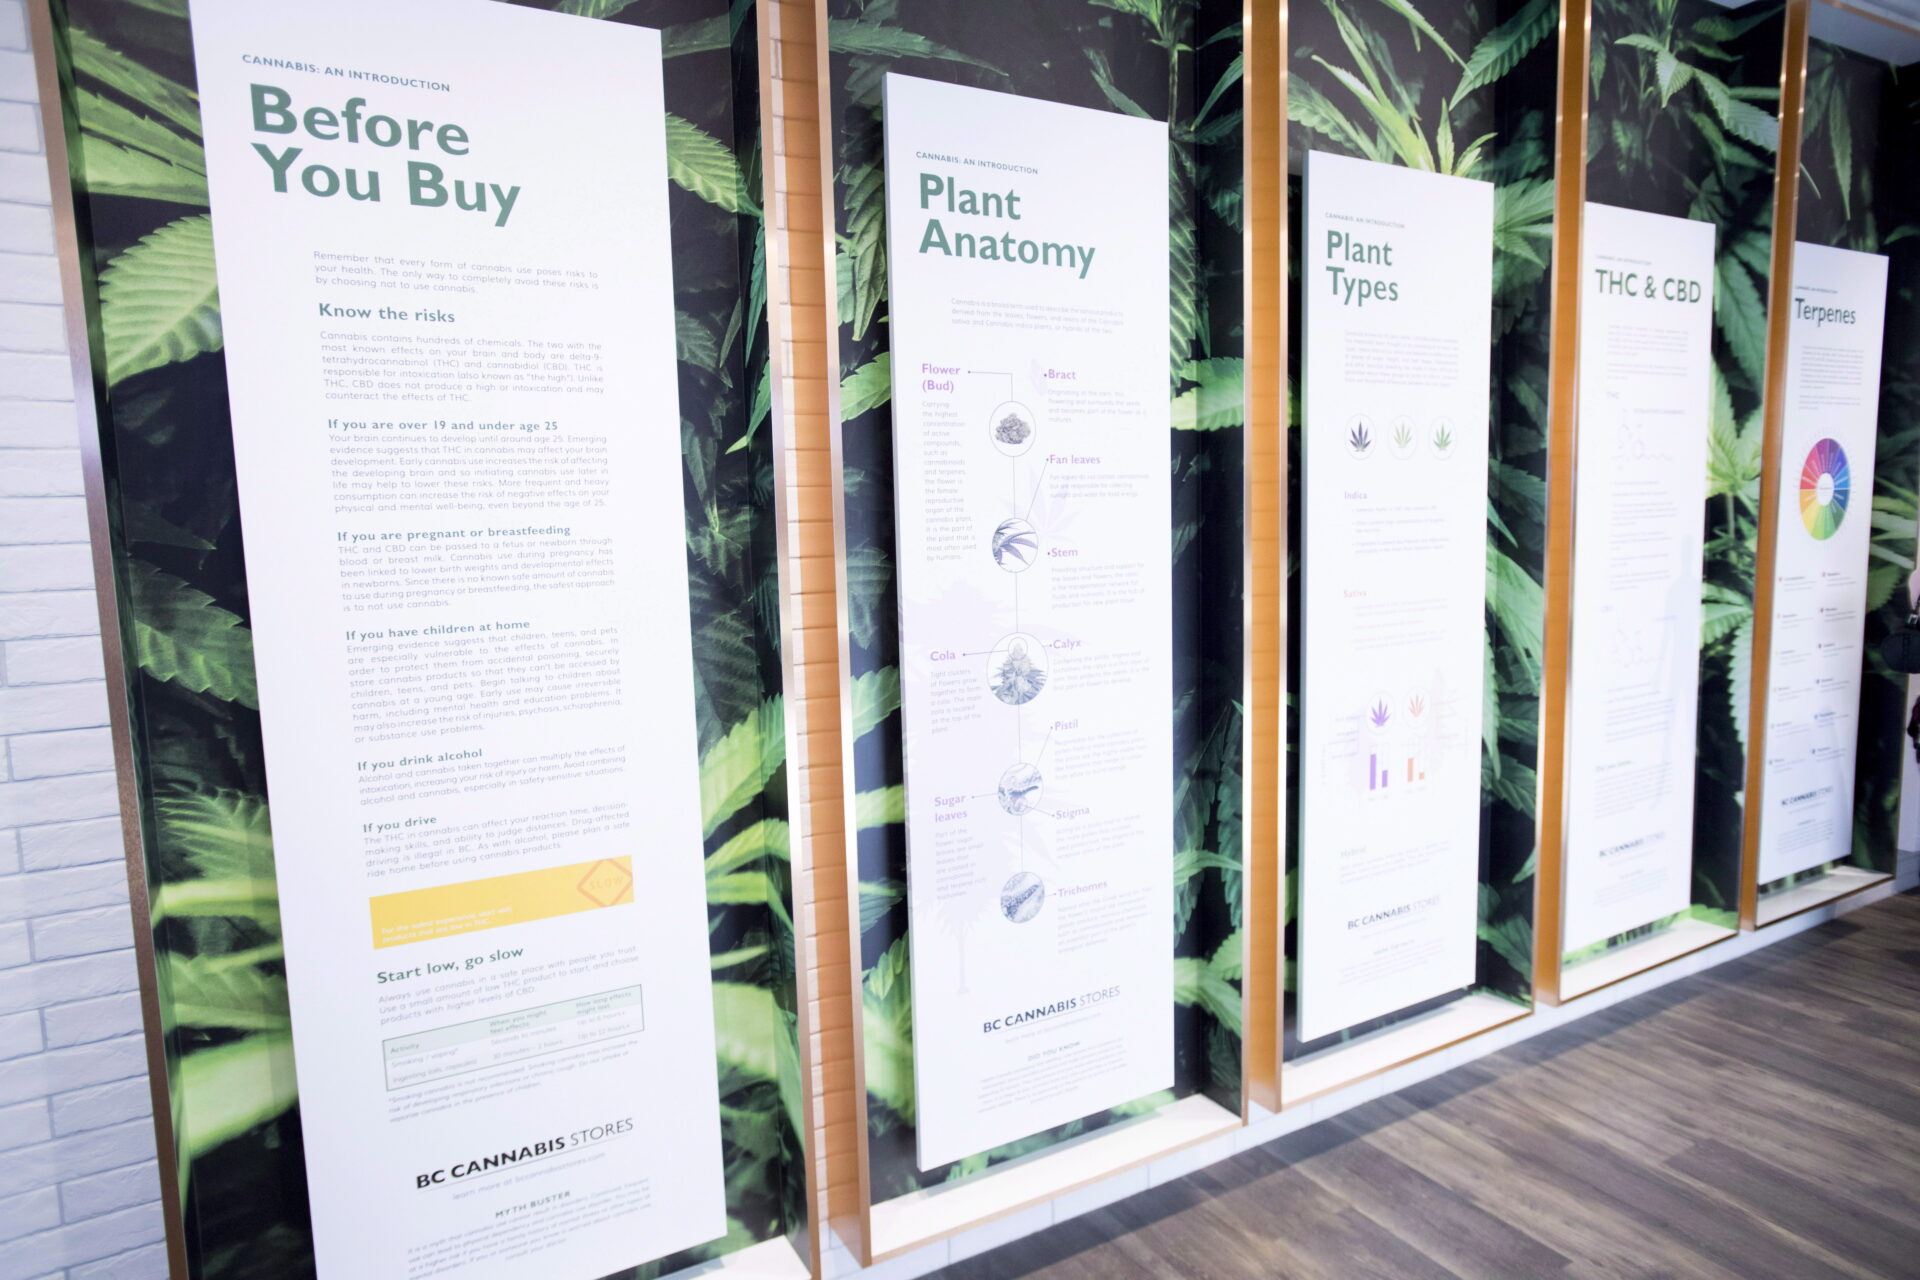 Five tall white panels line the walls and are filled with information about cannabis. Each panel is framed by a background of cannabis leaves. 